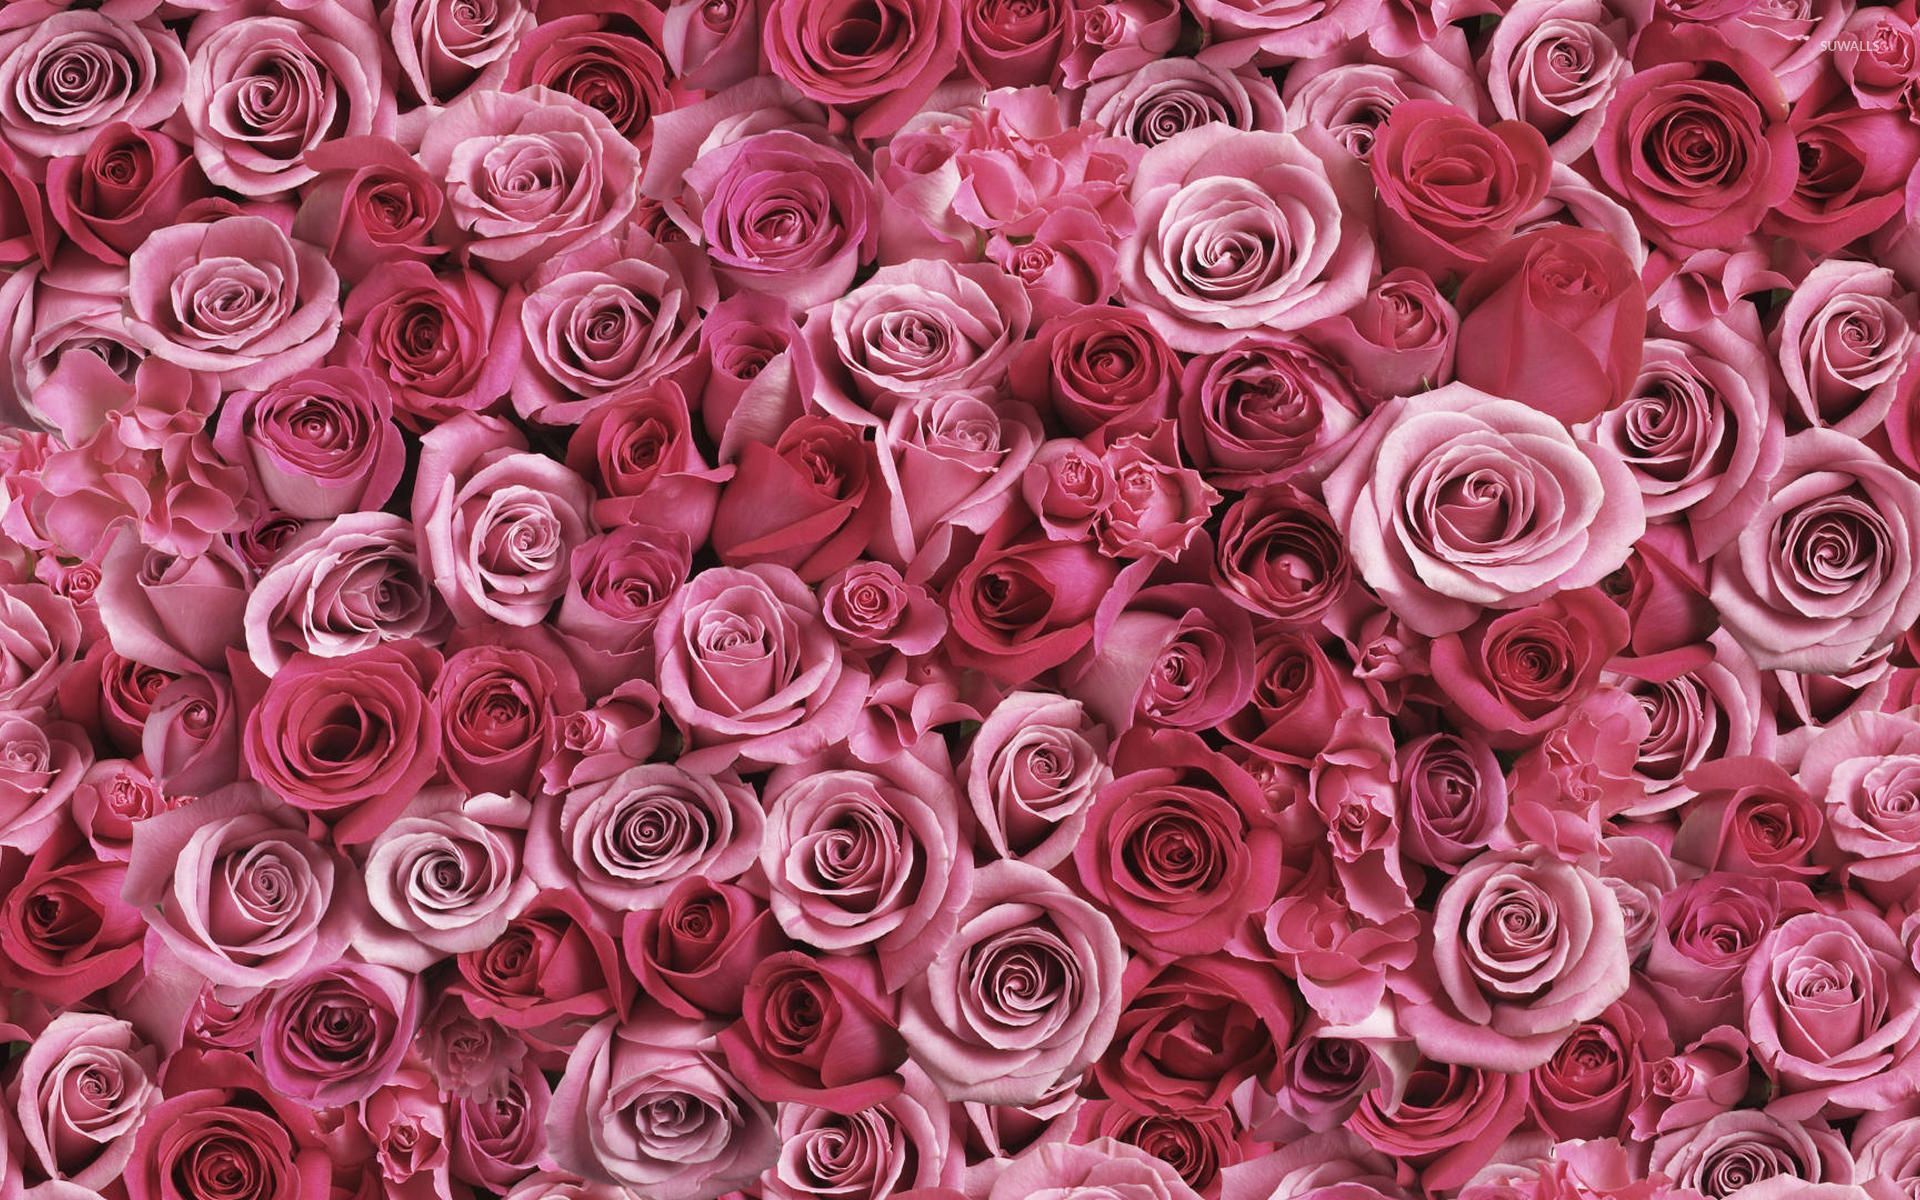 A lot of pink roses wallpaper - Flower wallpapers - #53638